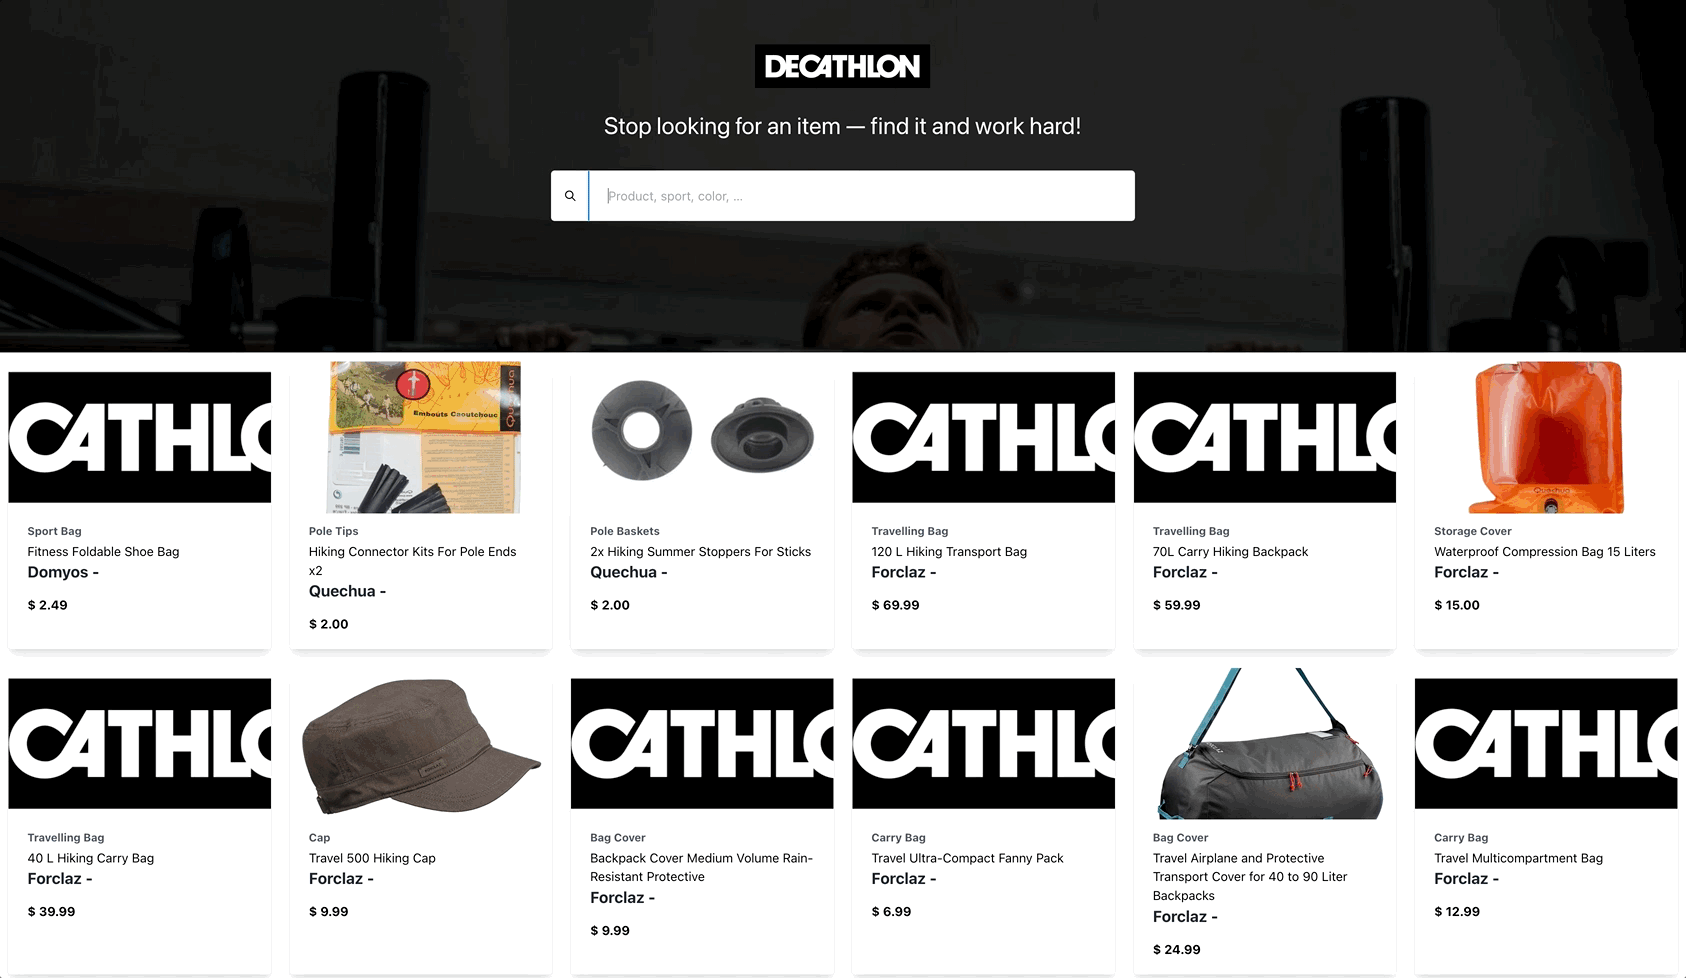 Searching for multiple items on the decathlon demo using Meilisearch